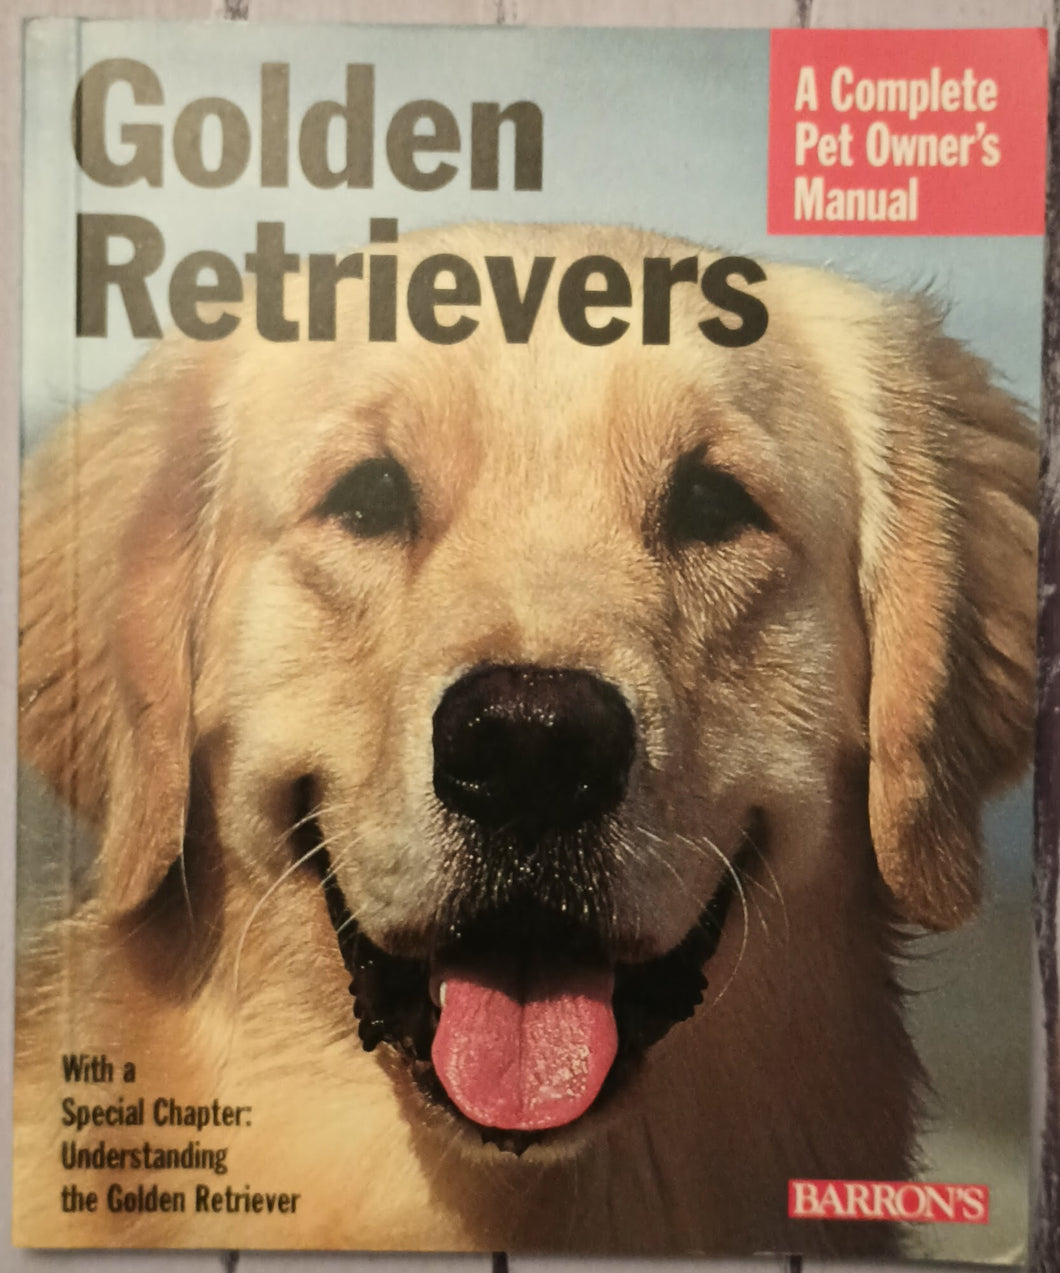 Golden Retrievers: Everything about Purchase, Care, Nutrition, and Behavior